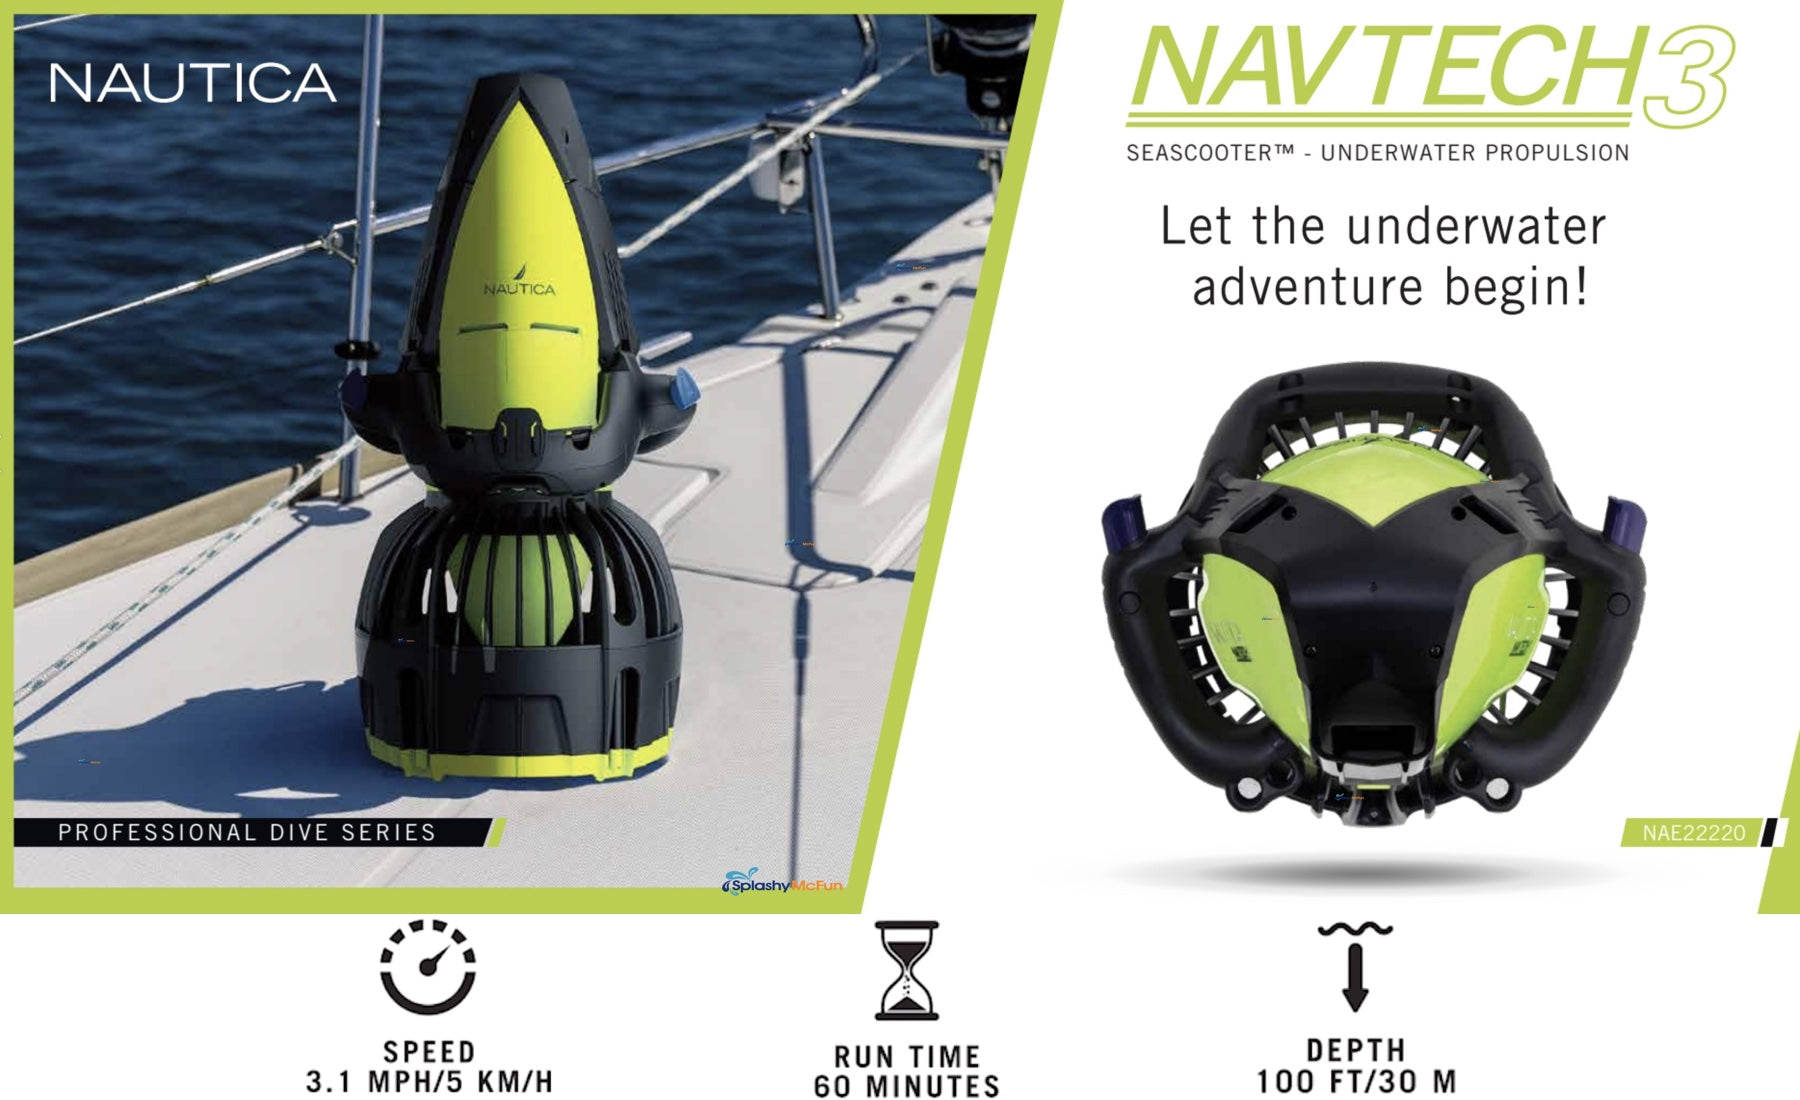 The lime green and black Nautica Navtech 3 sea scooter rests on its back or motor side while it rests on the front of a boat. Text reads; Let the underwater adventure begin!